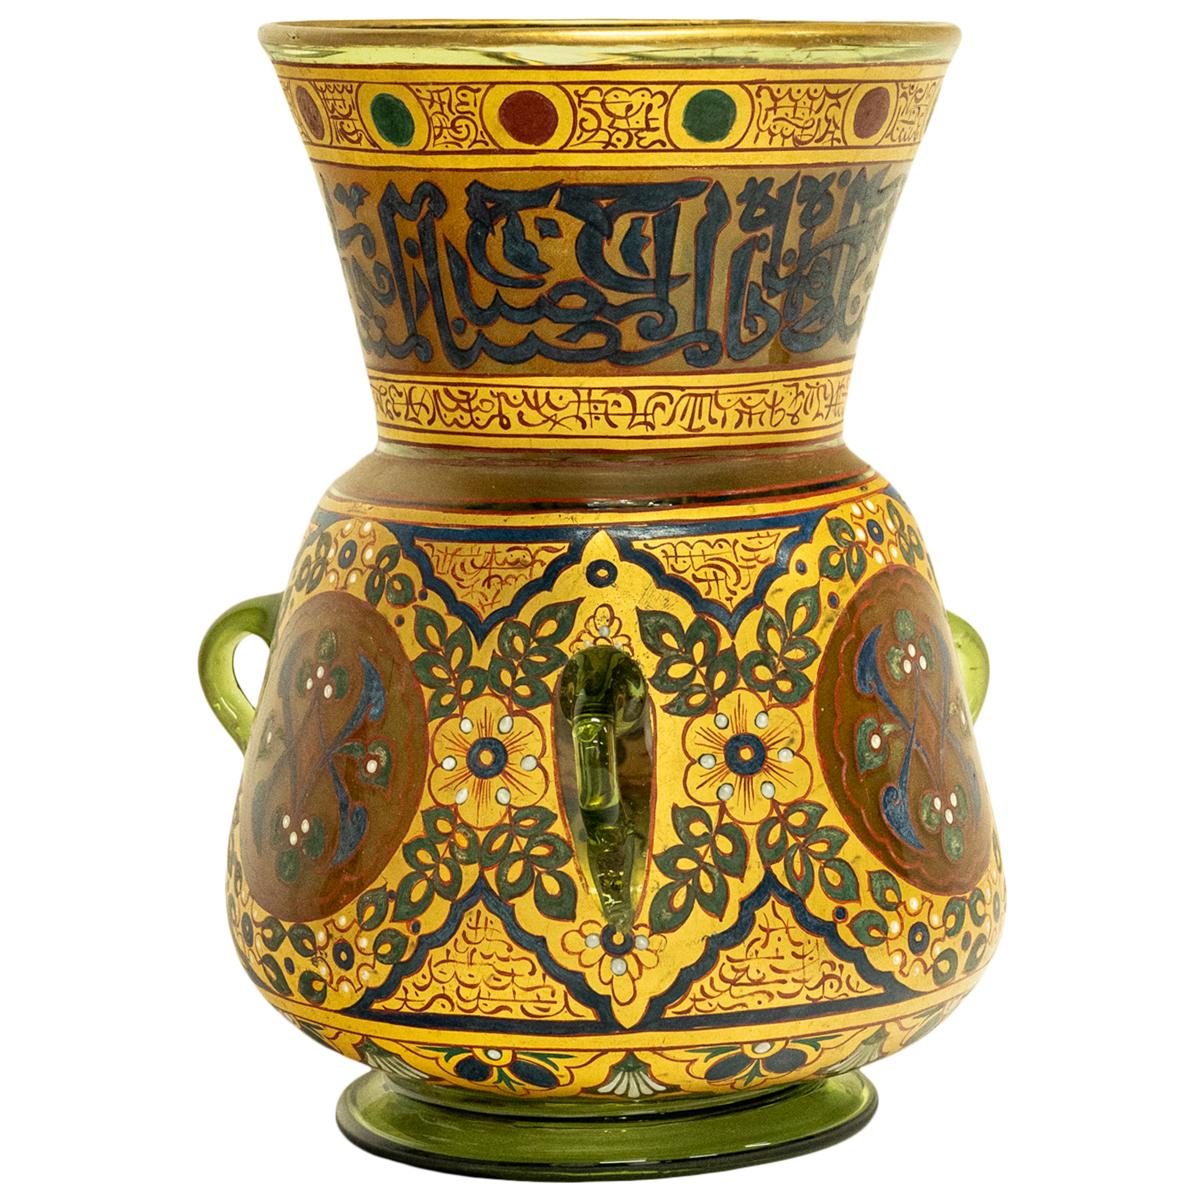 Antique French Islamic Glass Enamel Gilt Mamluk Revival Mosque Lamp Brocard 1880 For Sale 3